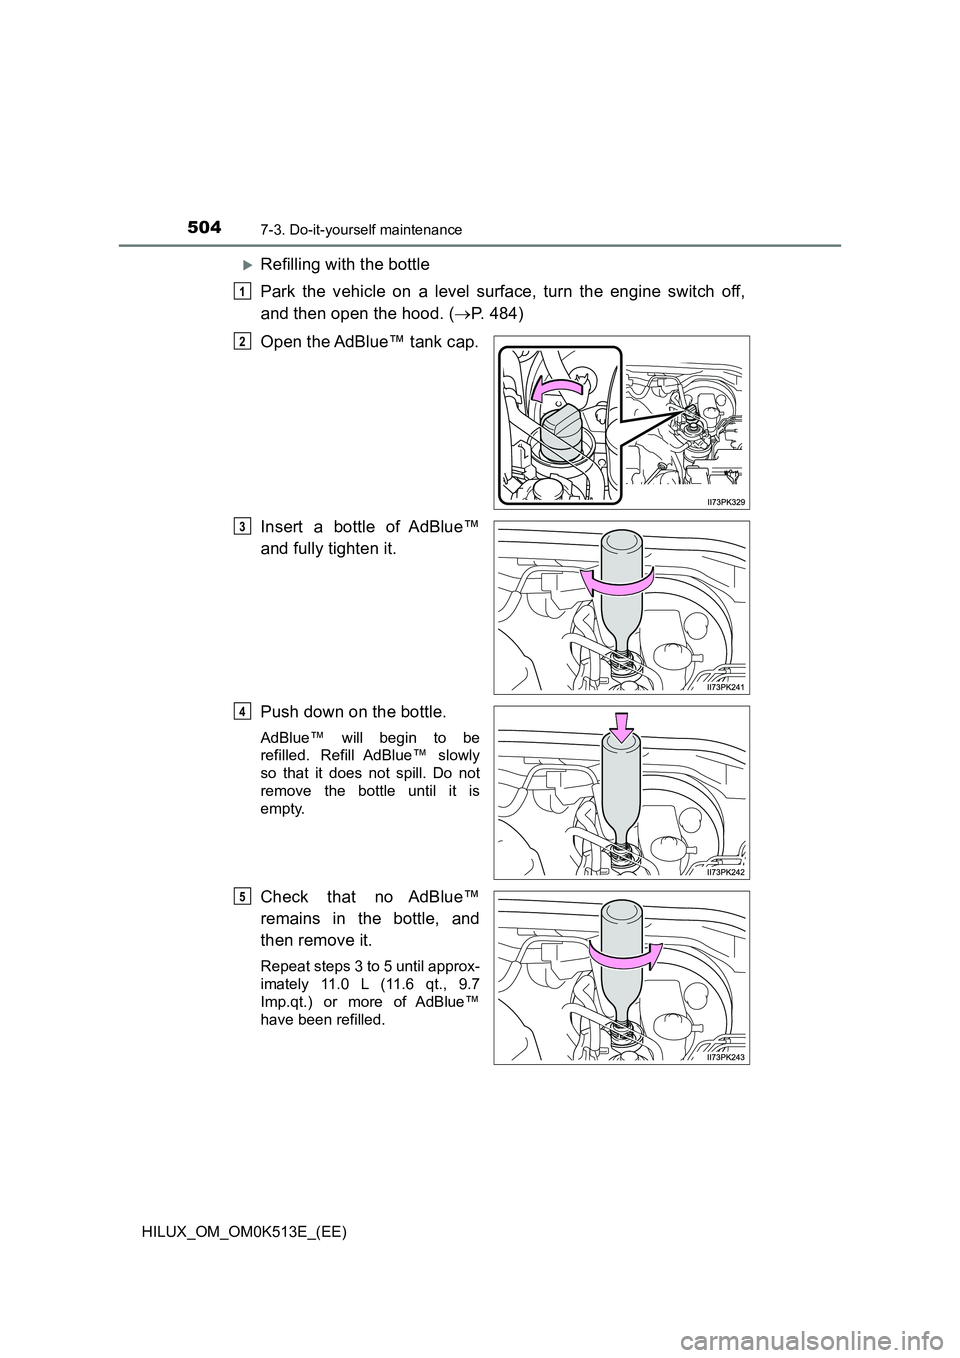 TOYOTA HILUX 2021  Owners Manual (in English) 5047-3. Do-it-yourself maintenance
HILUX_OM_OM0K513E_(EE)
Refilling with the bottle 
Park the vehicle on a level surface, turn the engine switch off, 
and then open the hood. ( P. 484) 
Open the